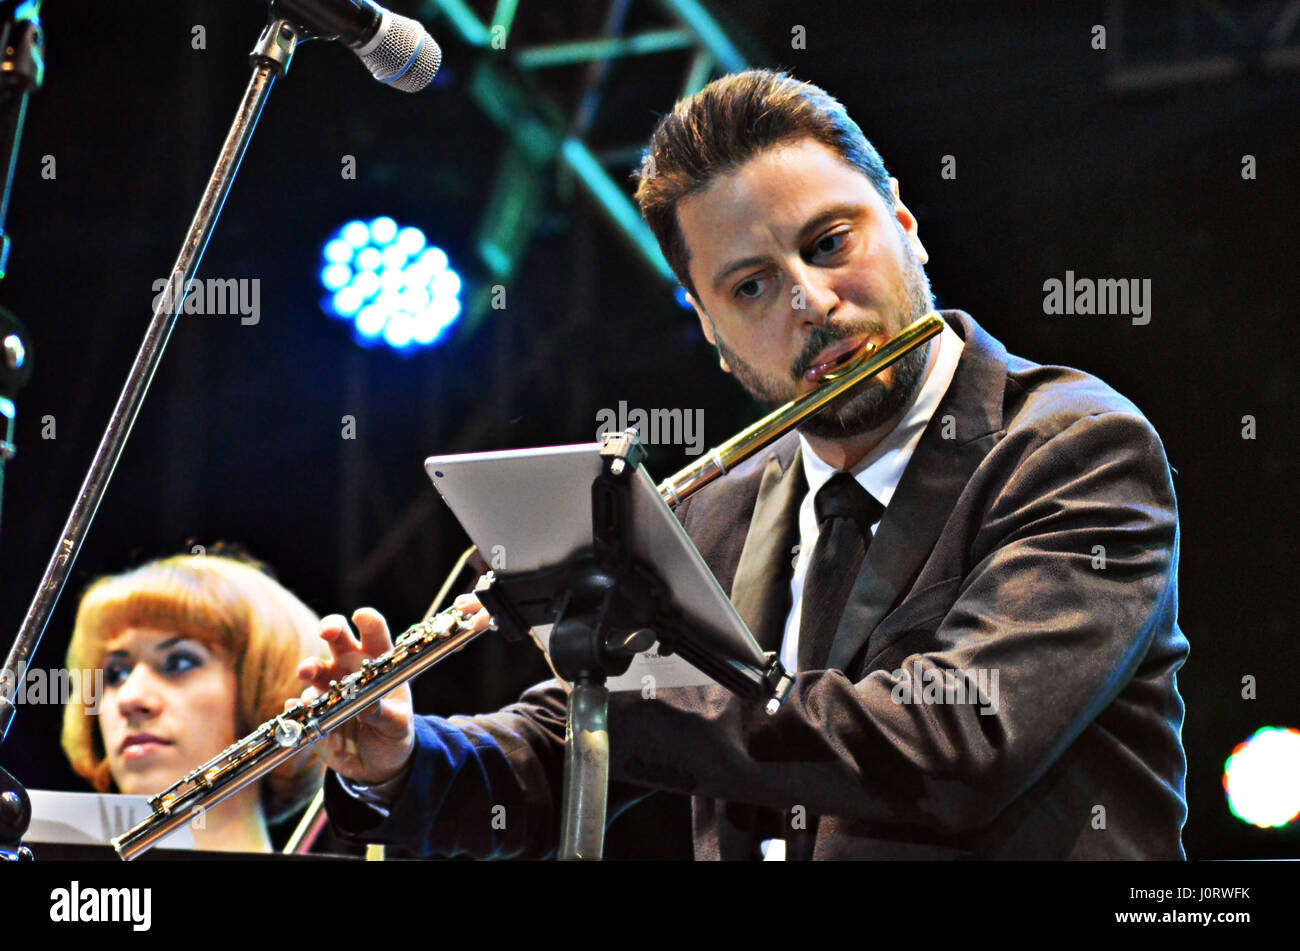 Bucharest, Romania. 15th April, 2017. Flautist Matei Ioachimescu plays with the all-female string quartet Passione on an open air stage at the city's largest Easter Fair. Credit: Douglas MacKenzie/Alamy Live News Stock Photo